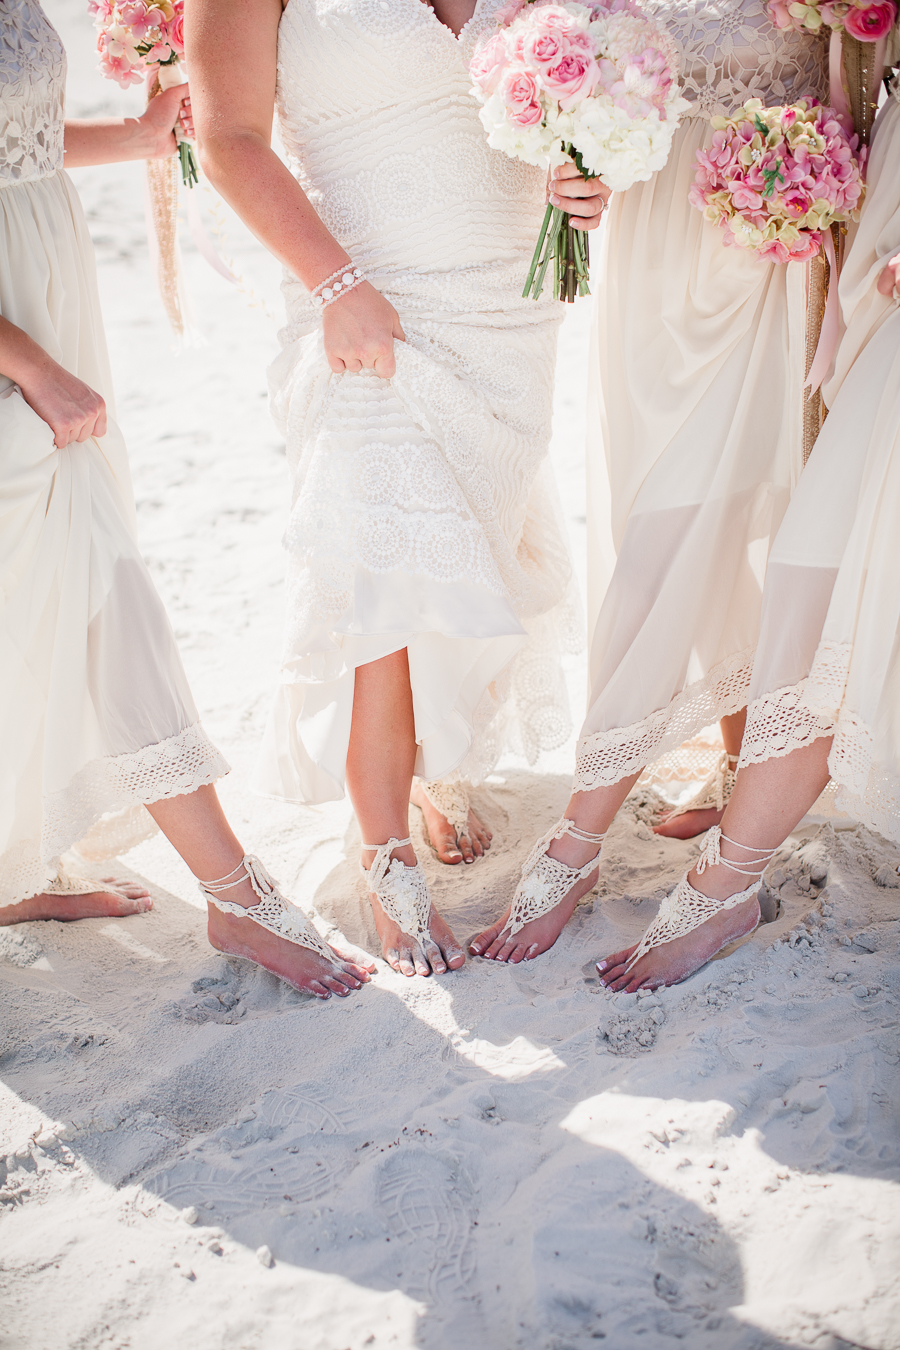 Showing off their sand shoes at this Daytona Beach Wedding by Destination Wedding Photographer, Amanda May Photos.